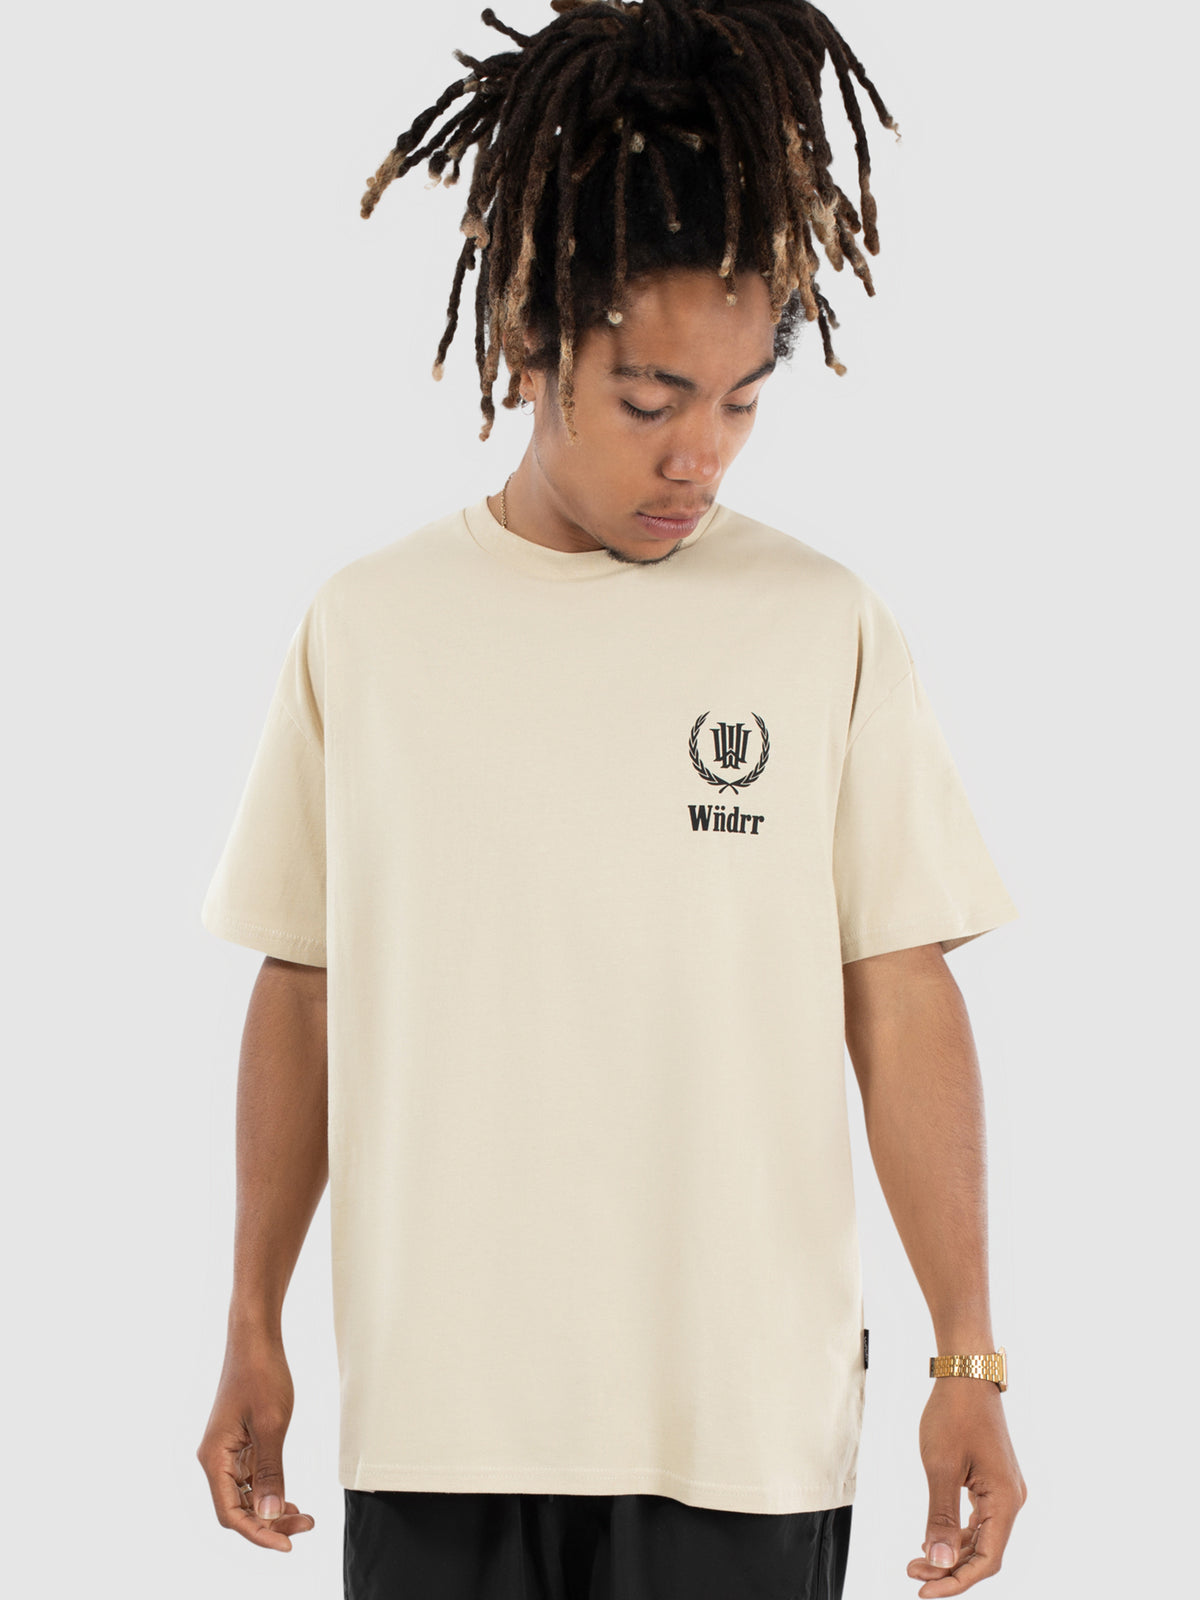 Archive Box Fit T-Shirt in Tan